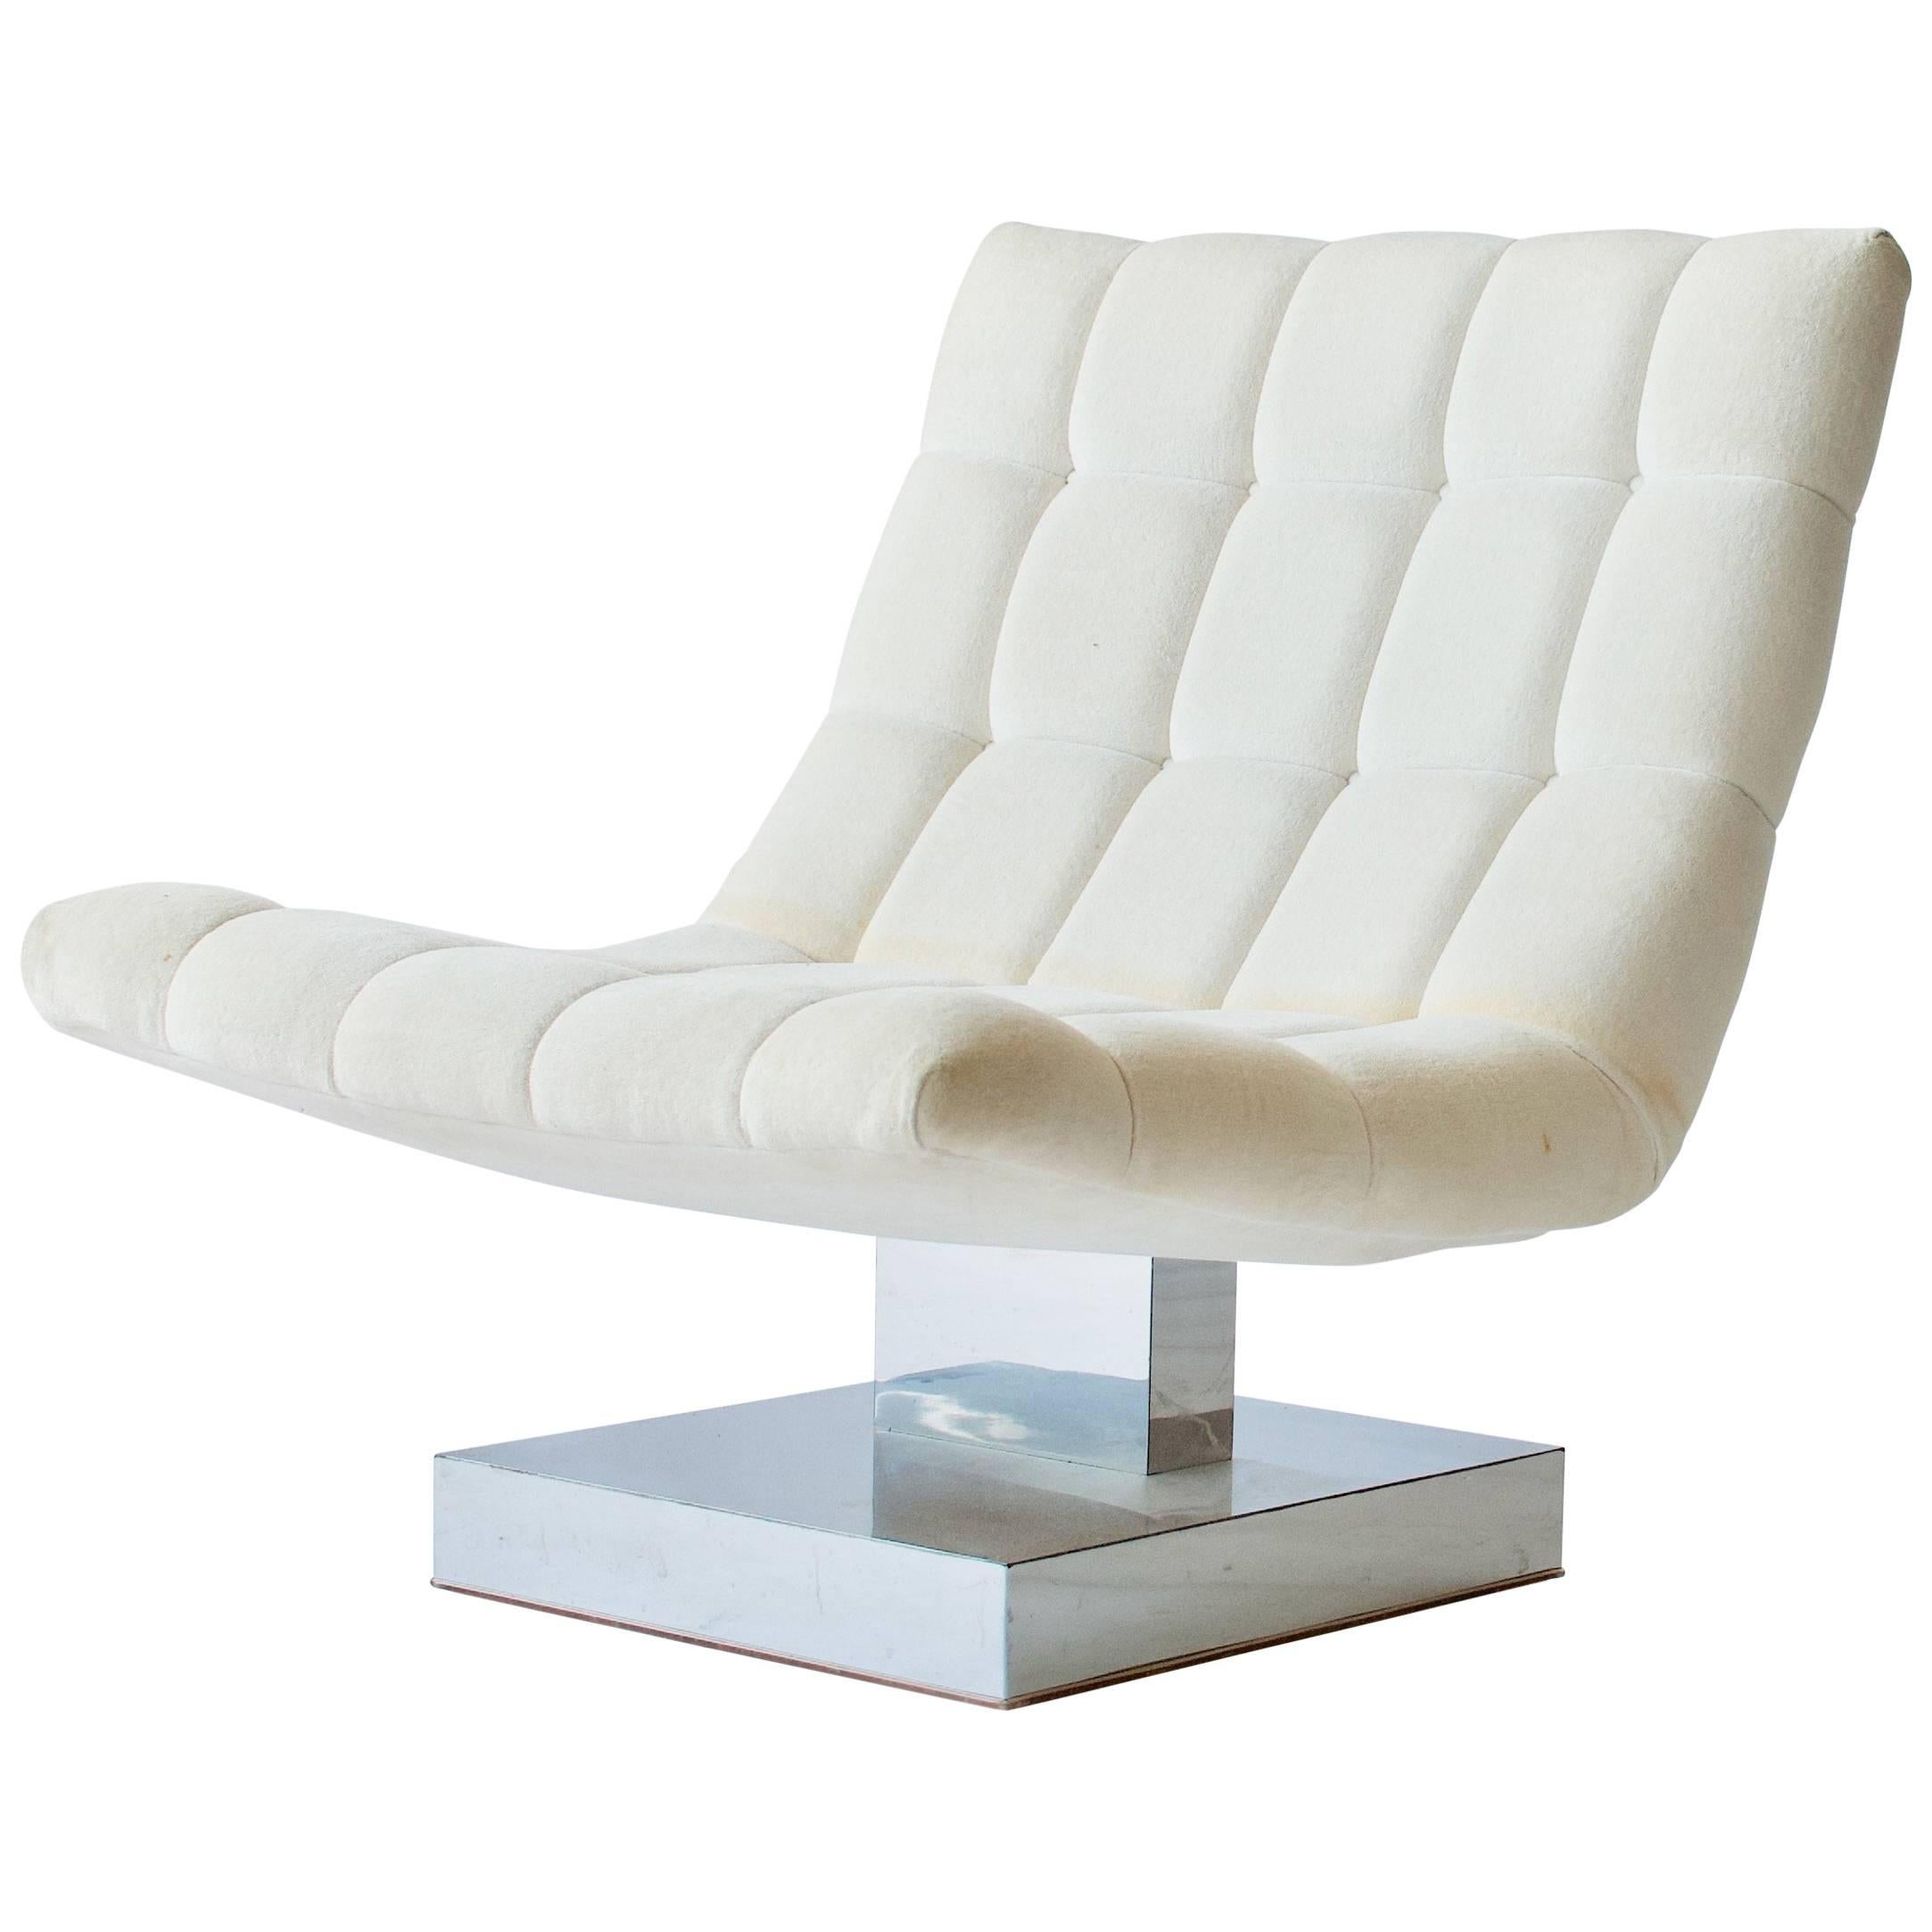 Milo Baughman Cantilevered Lounge Chair For Sale